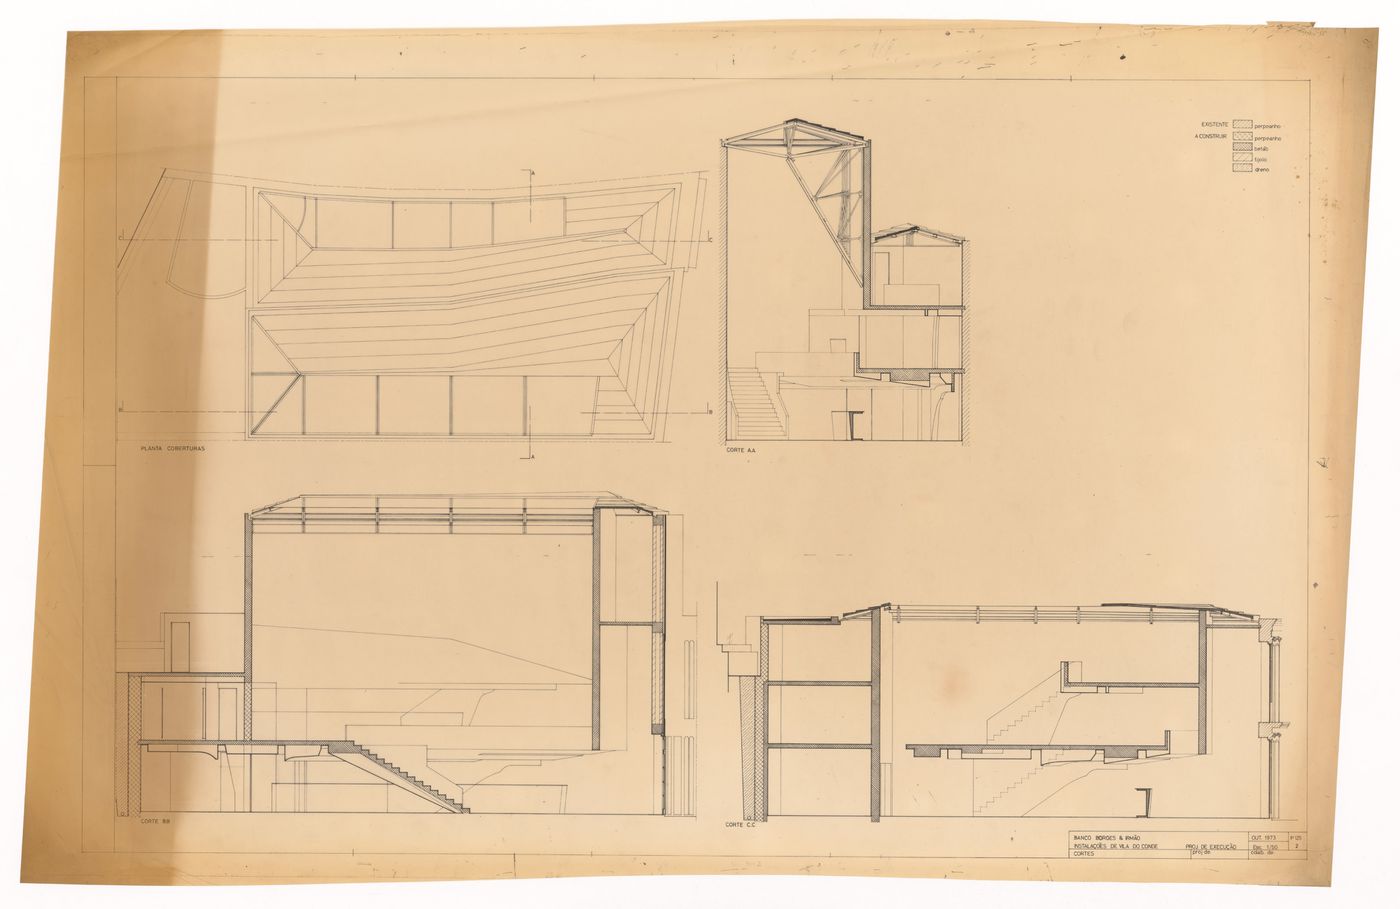 Plan and sections for Borges & Irmão bank, Vila do Conde